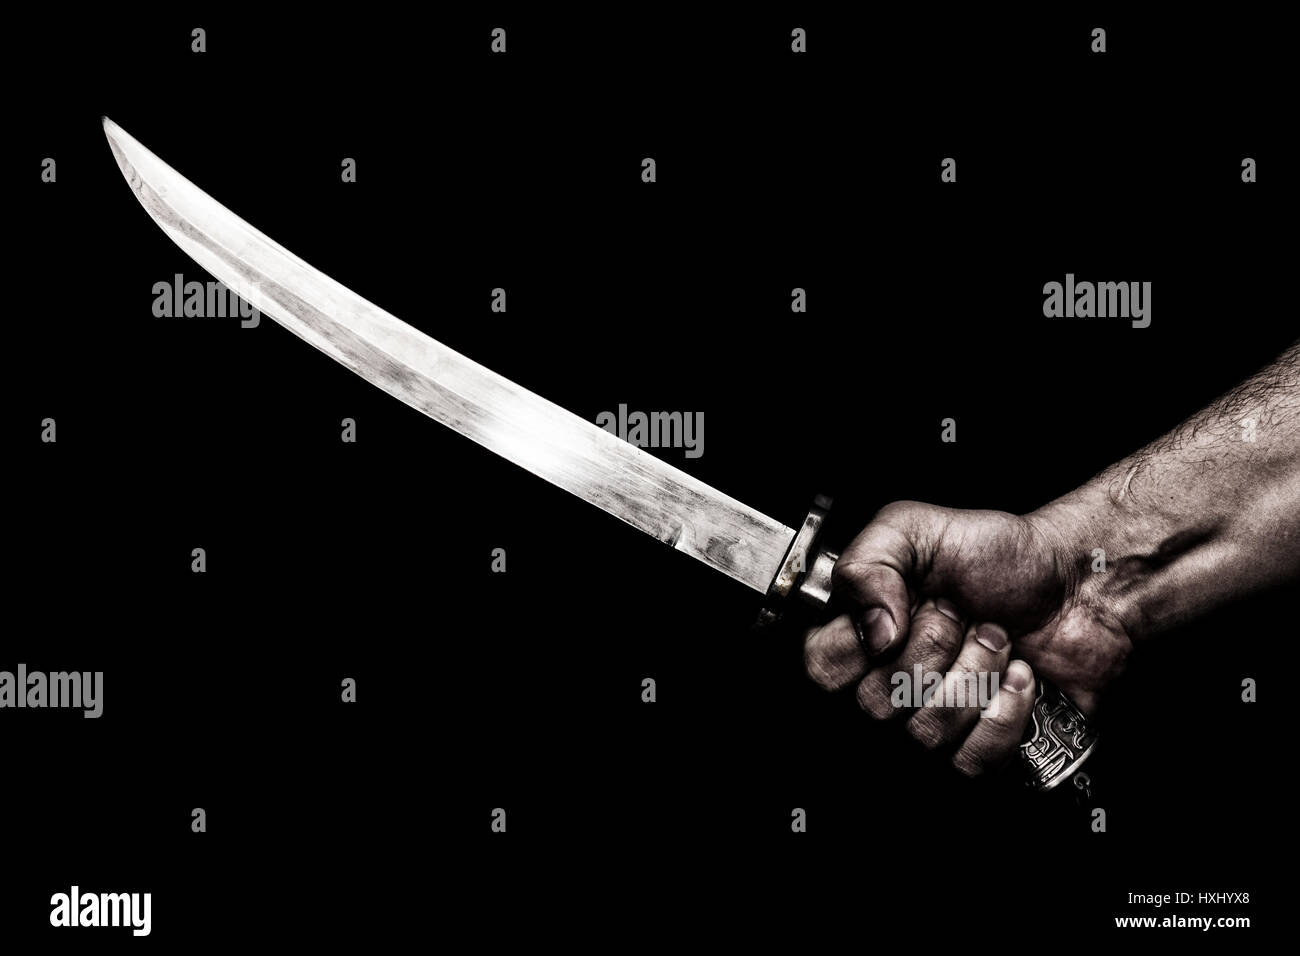 hand holding knife against plank wood Stock Photo